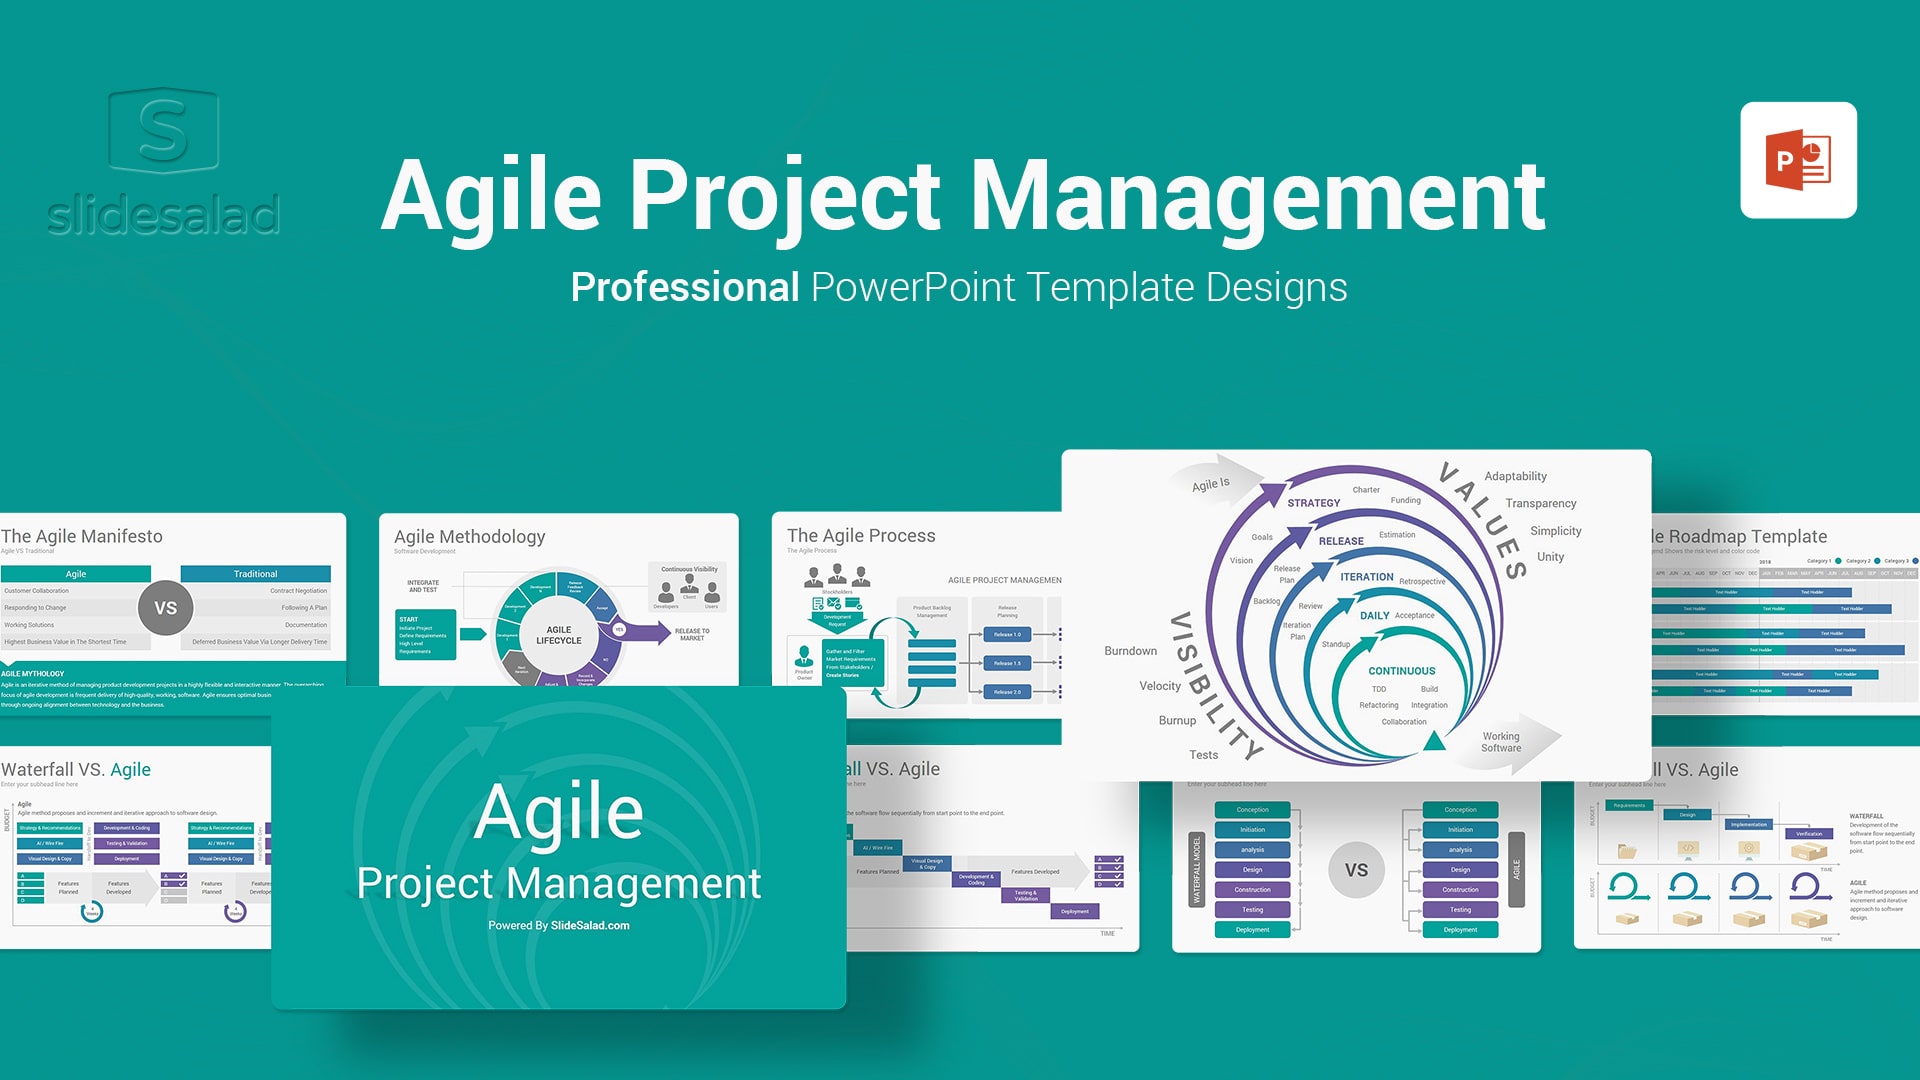 Agile Project Management PowerPoint Presentation Template - Detailed PPT Infographic Slide Layouts That You Need to Showcase About Agile Project Management